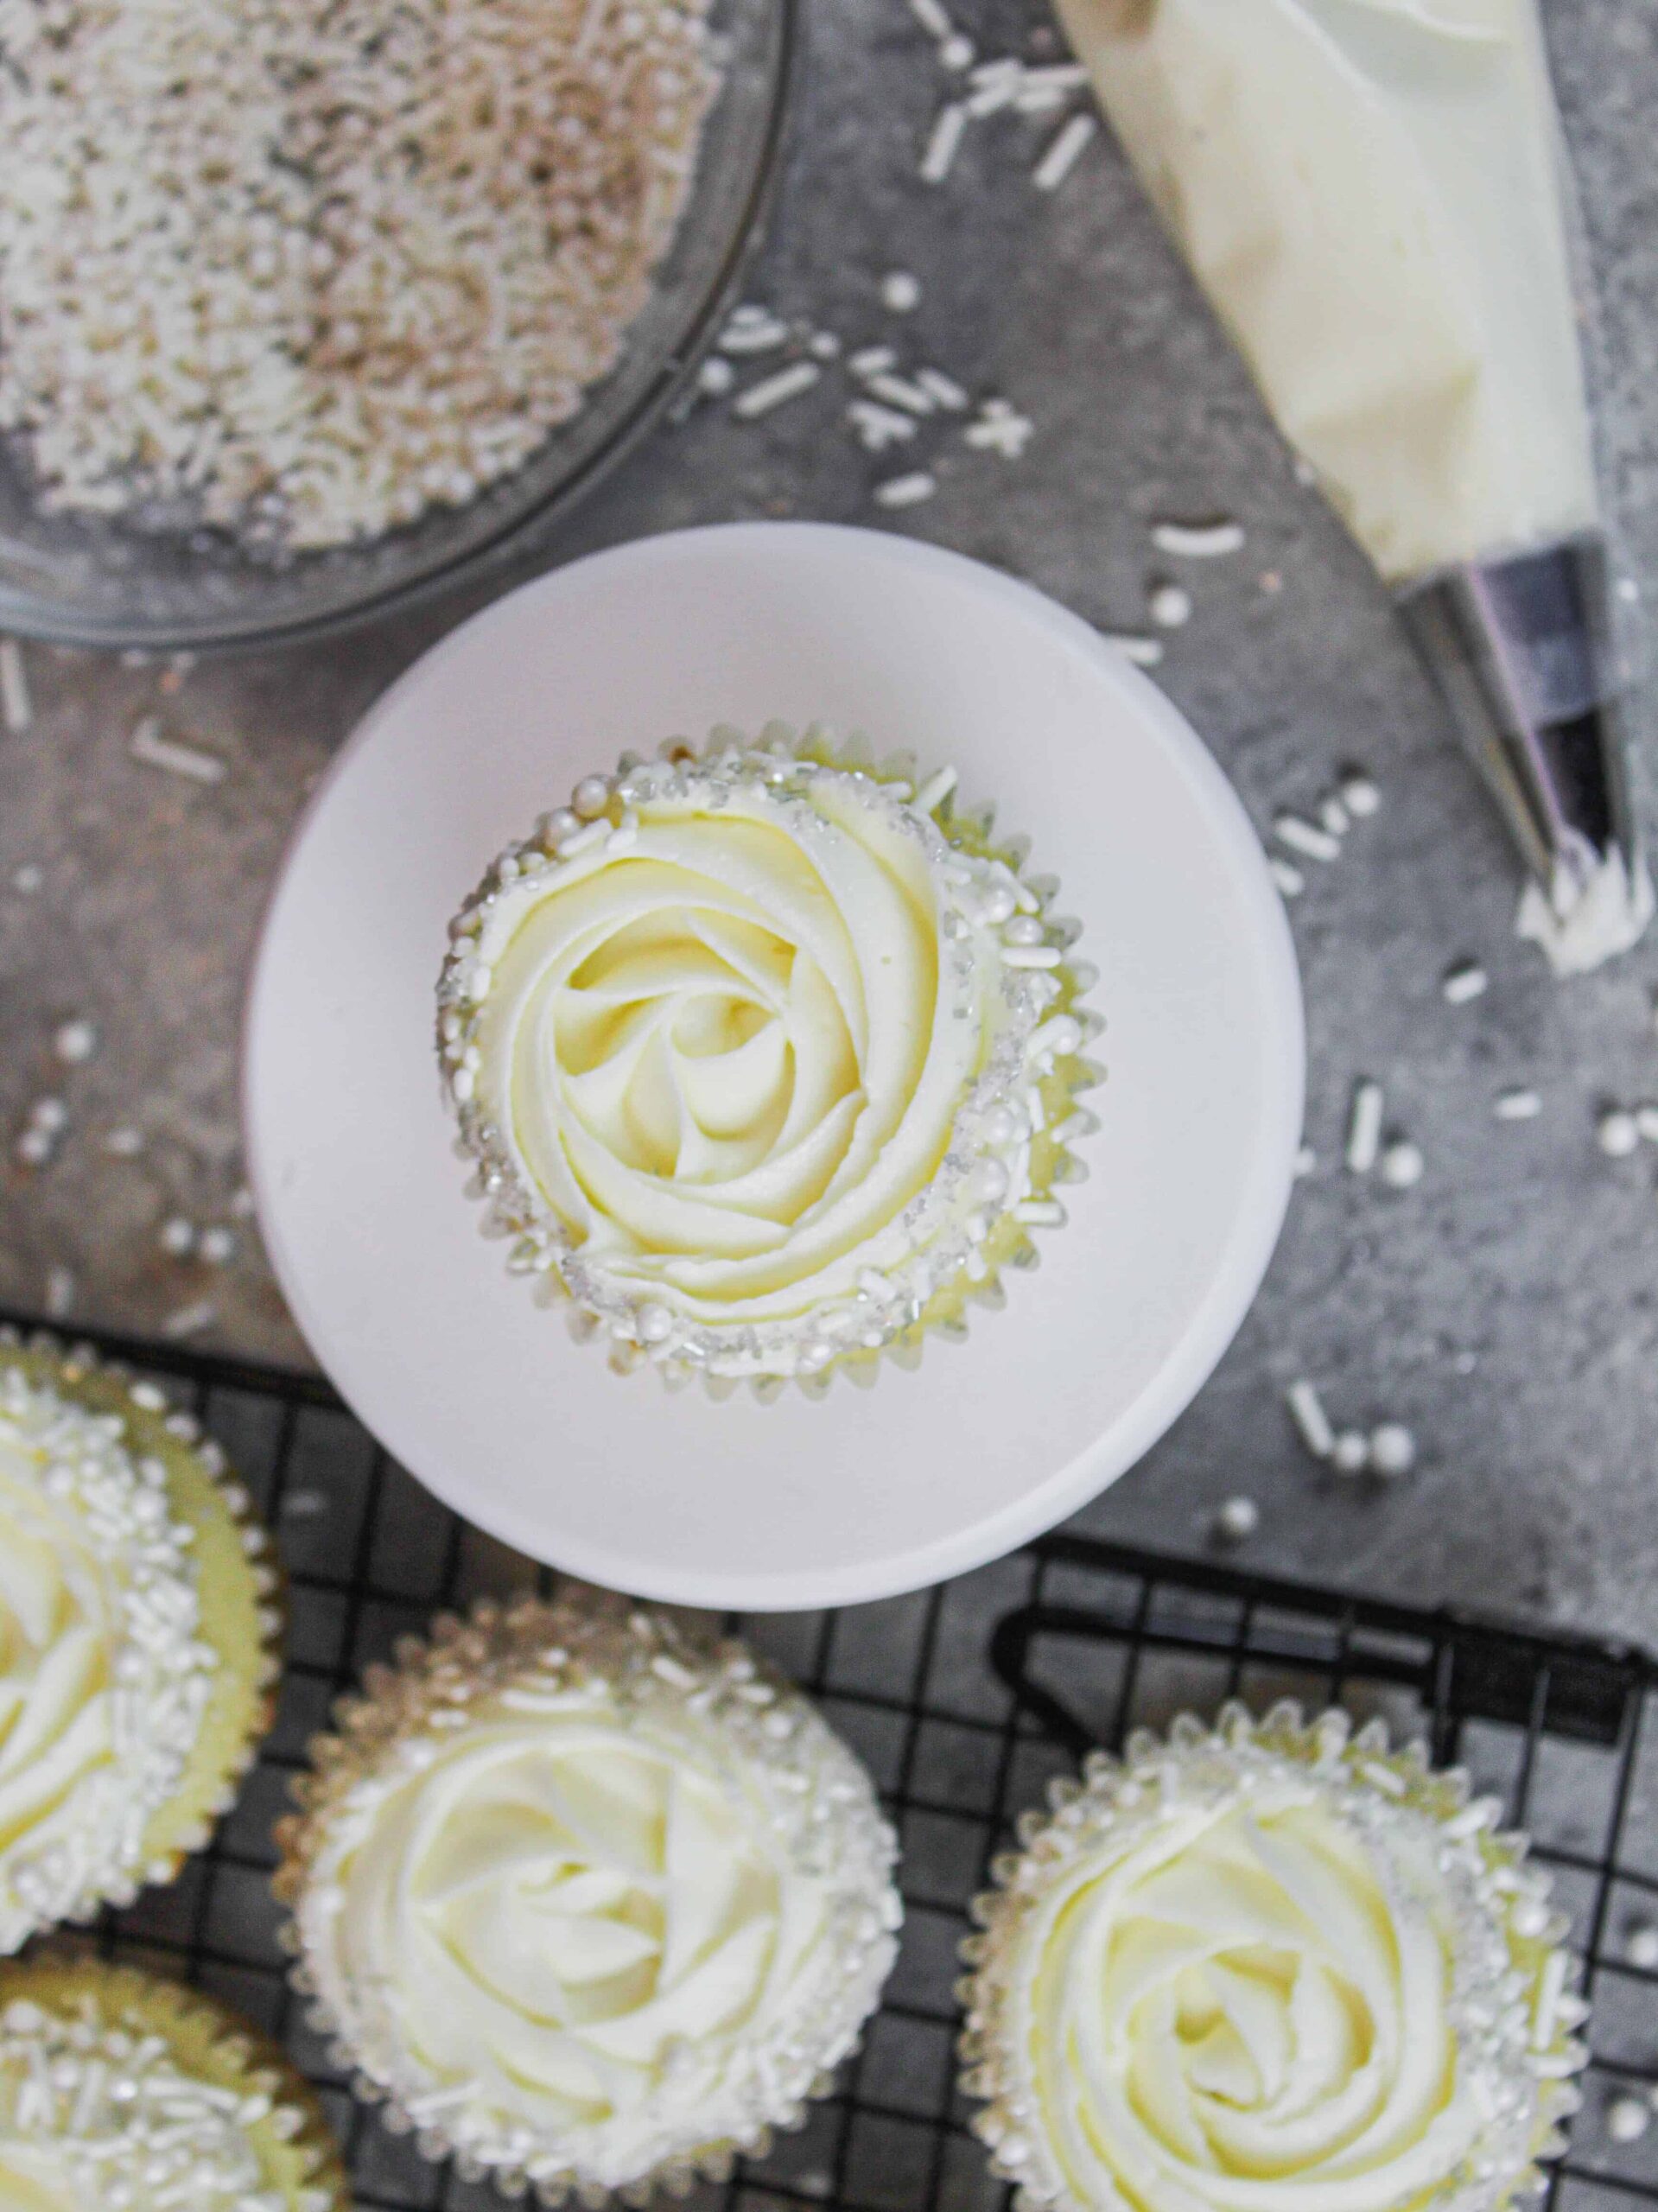 image of almond cupcakes decorated with a wilton 1m frosting tip and a fancy white sprinkle blend
